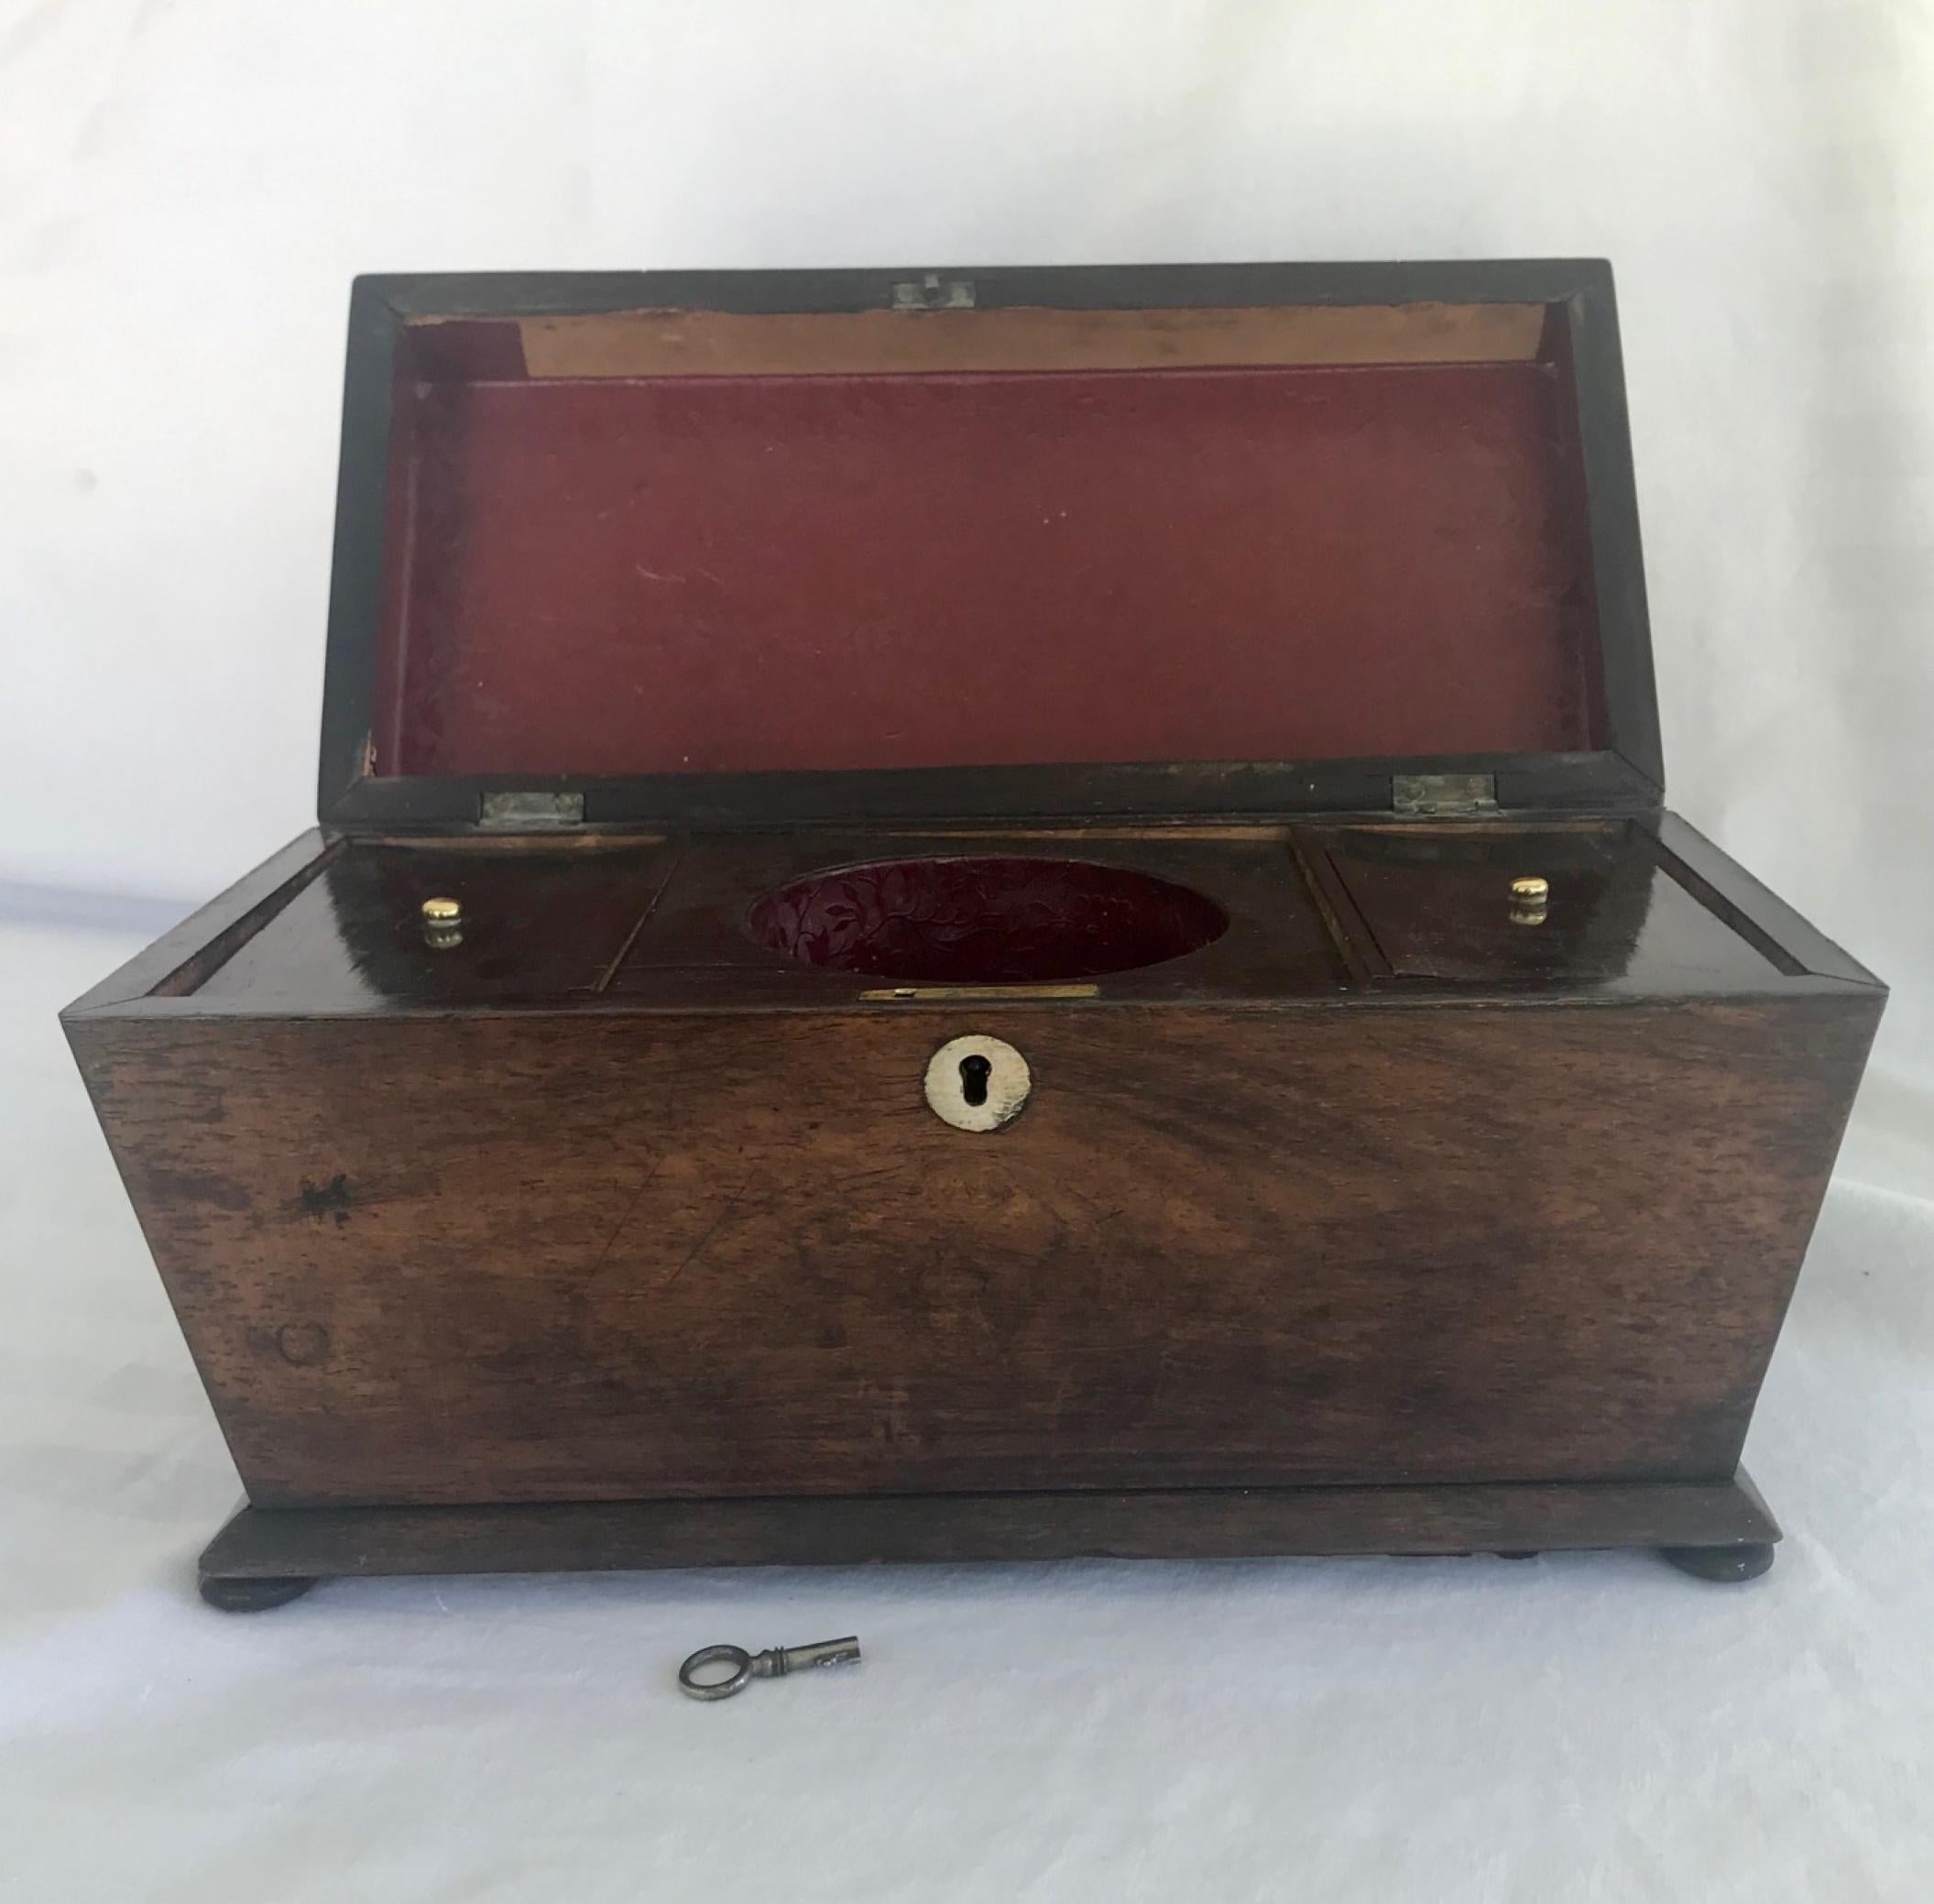 Early 19th century English rosewood tea caddy

This beautiful and large rosewood tea caddy has a sarcophagus shaped body and pyramid shaped lid. The fitted interior is comprised of 2 tea compartments with button knobbed lids. The box is